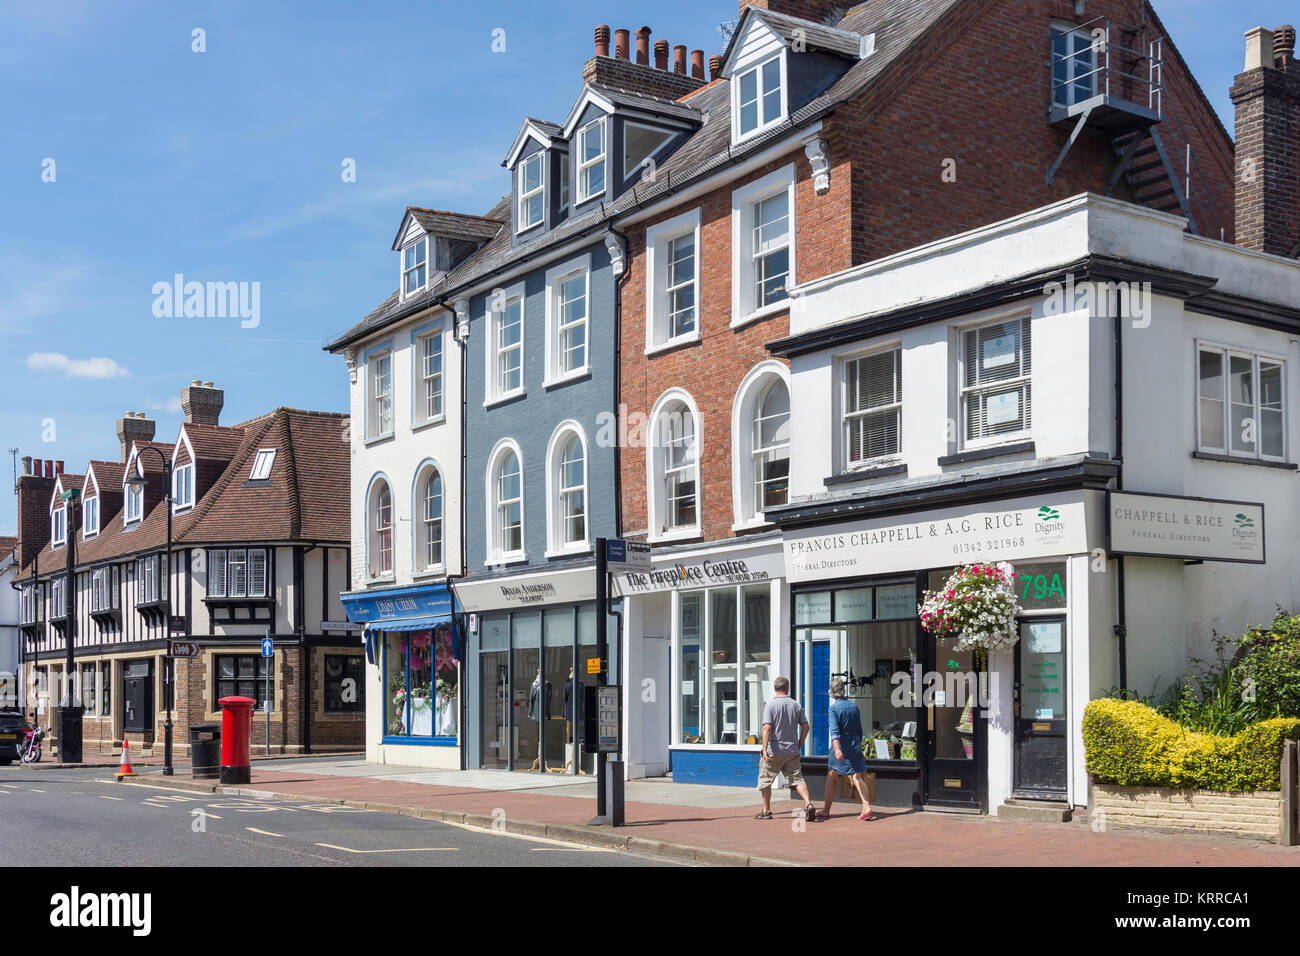 High Street, East Grinstead West Sussex, in Inghilterra, Regno Unito Foto Stock